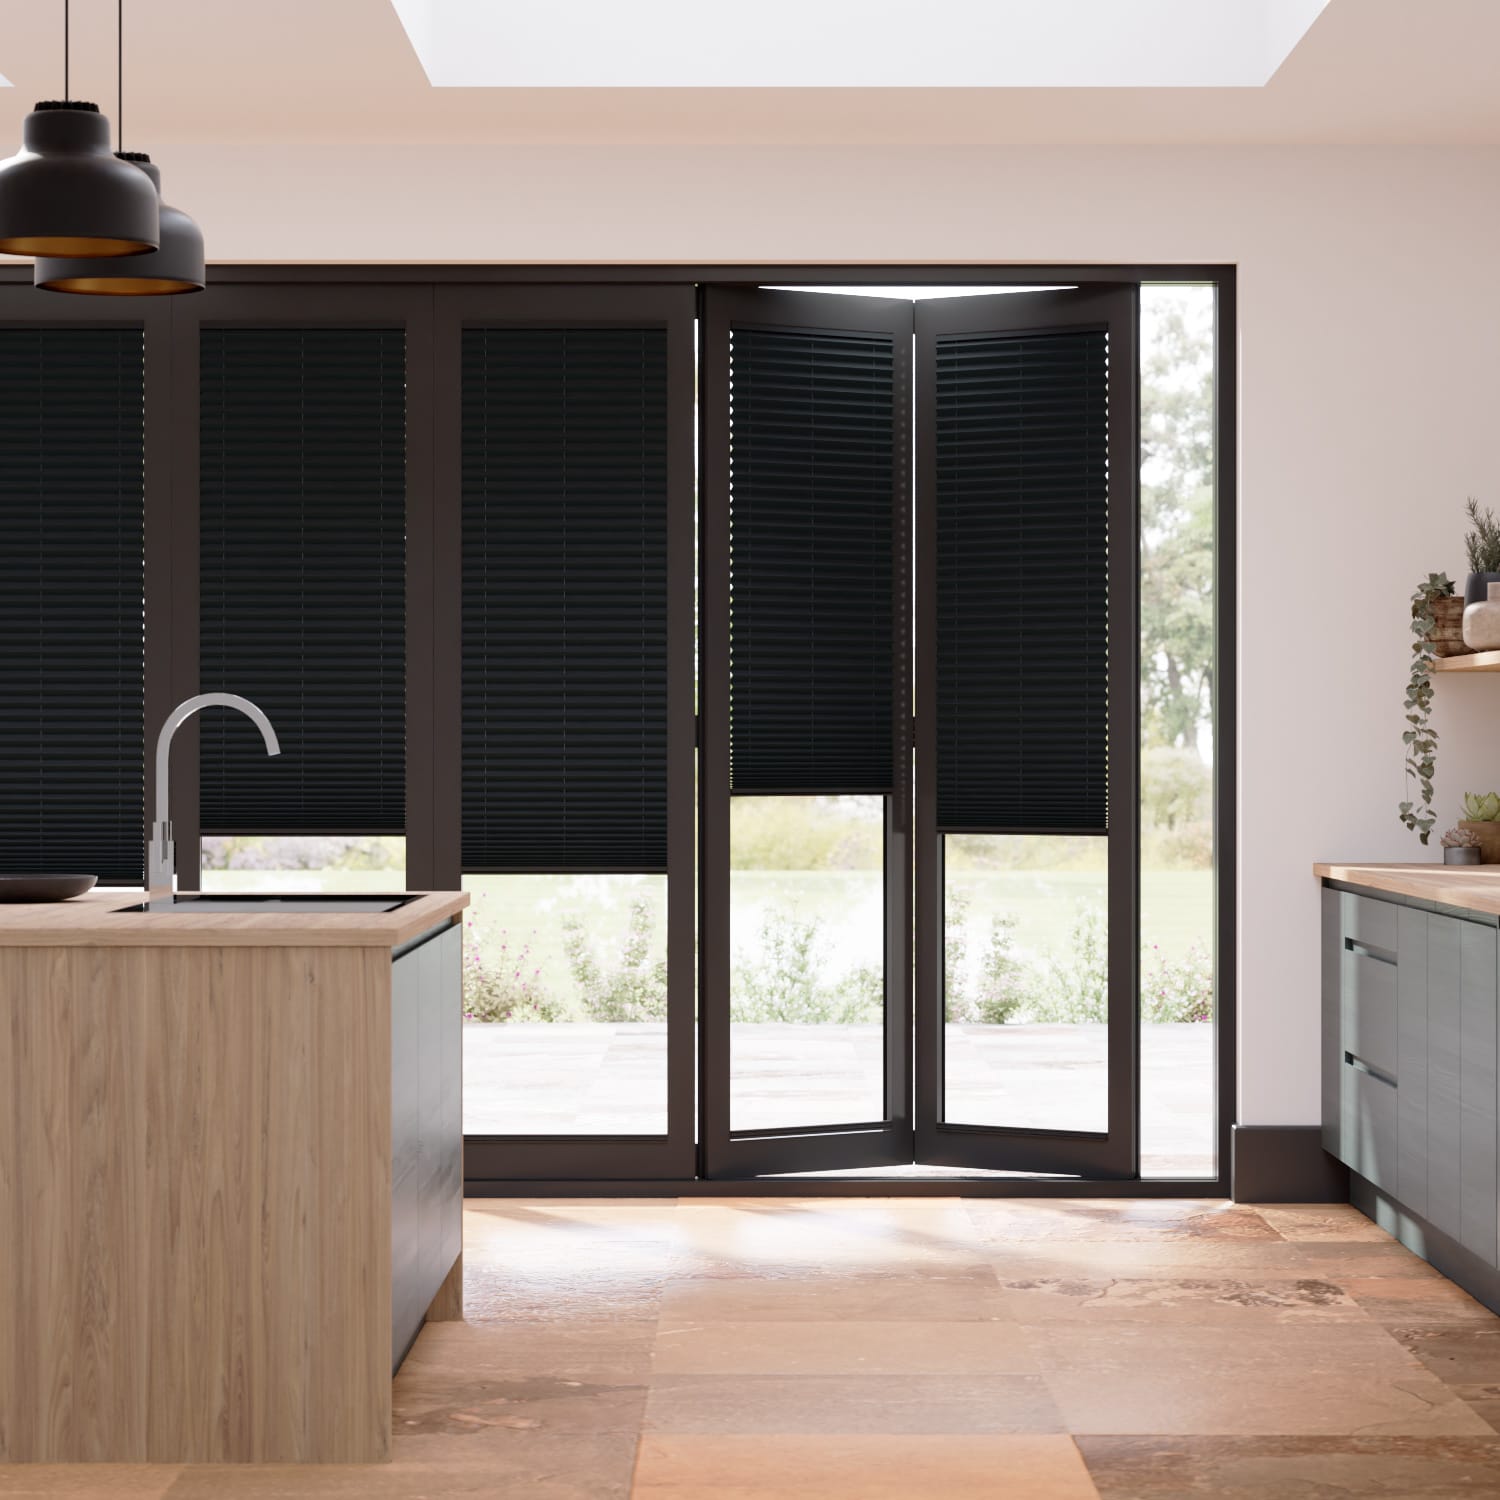 Blinds For Patio Doors Made To Measure, How To Fit Roller Blinds On Patio Doors